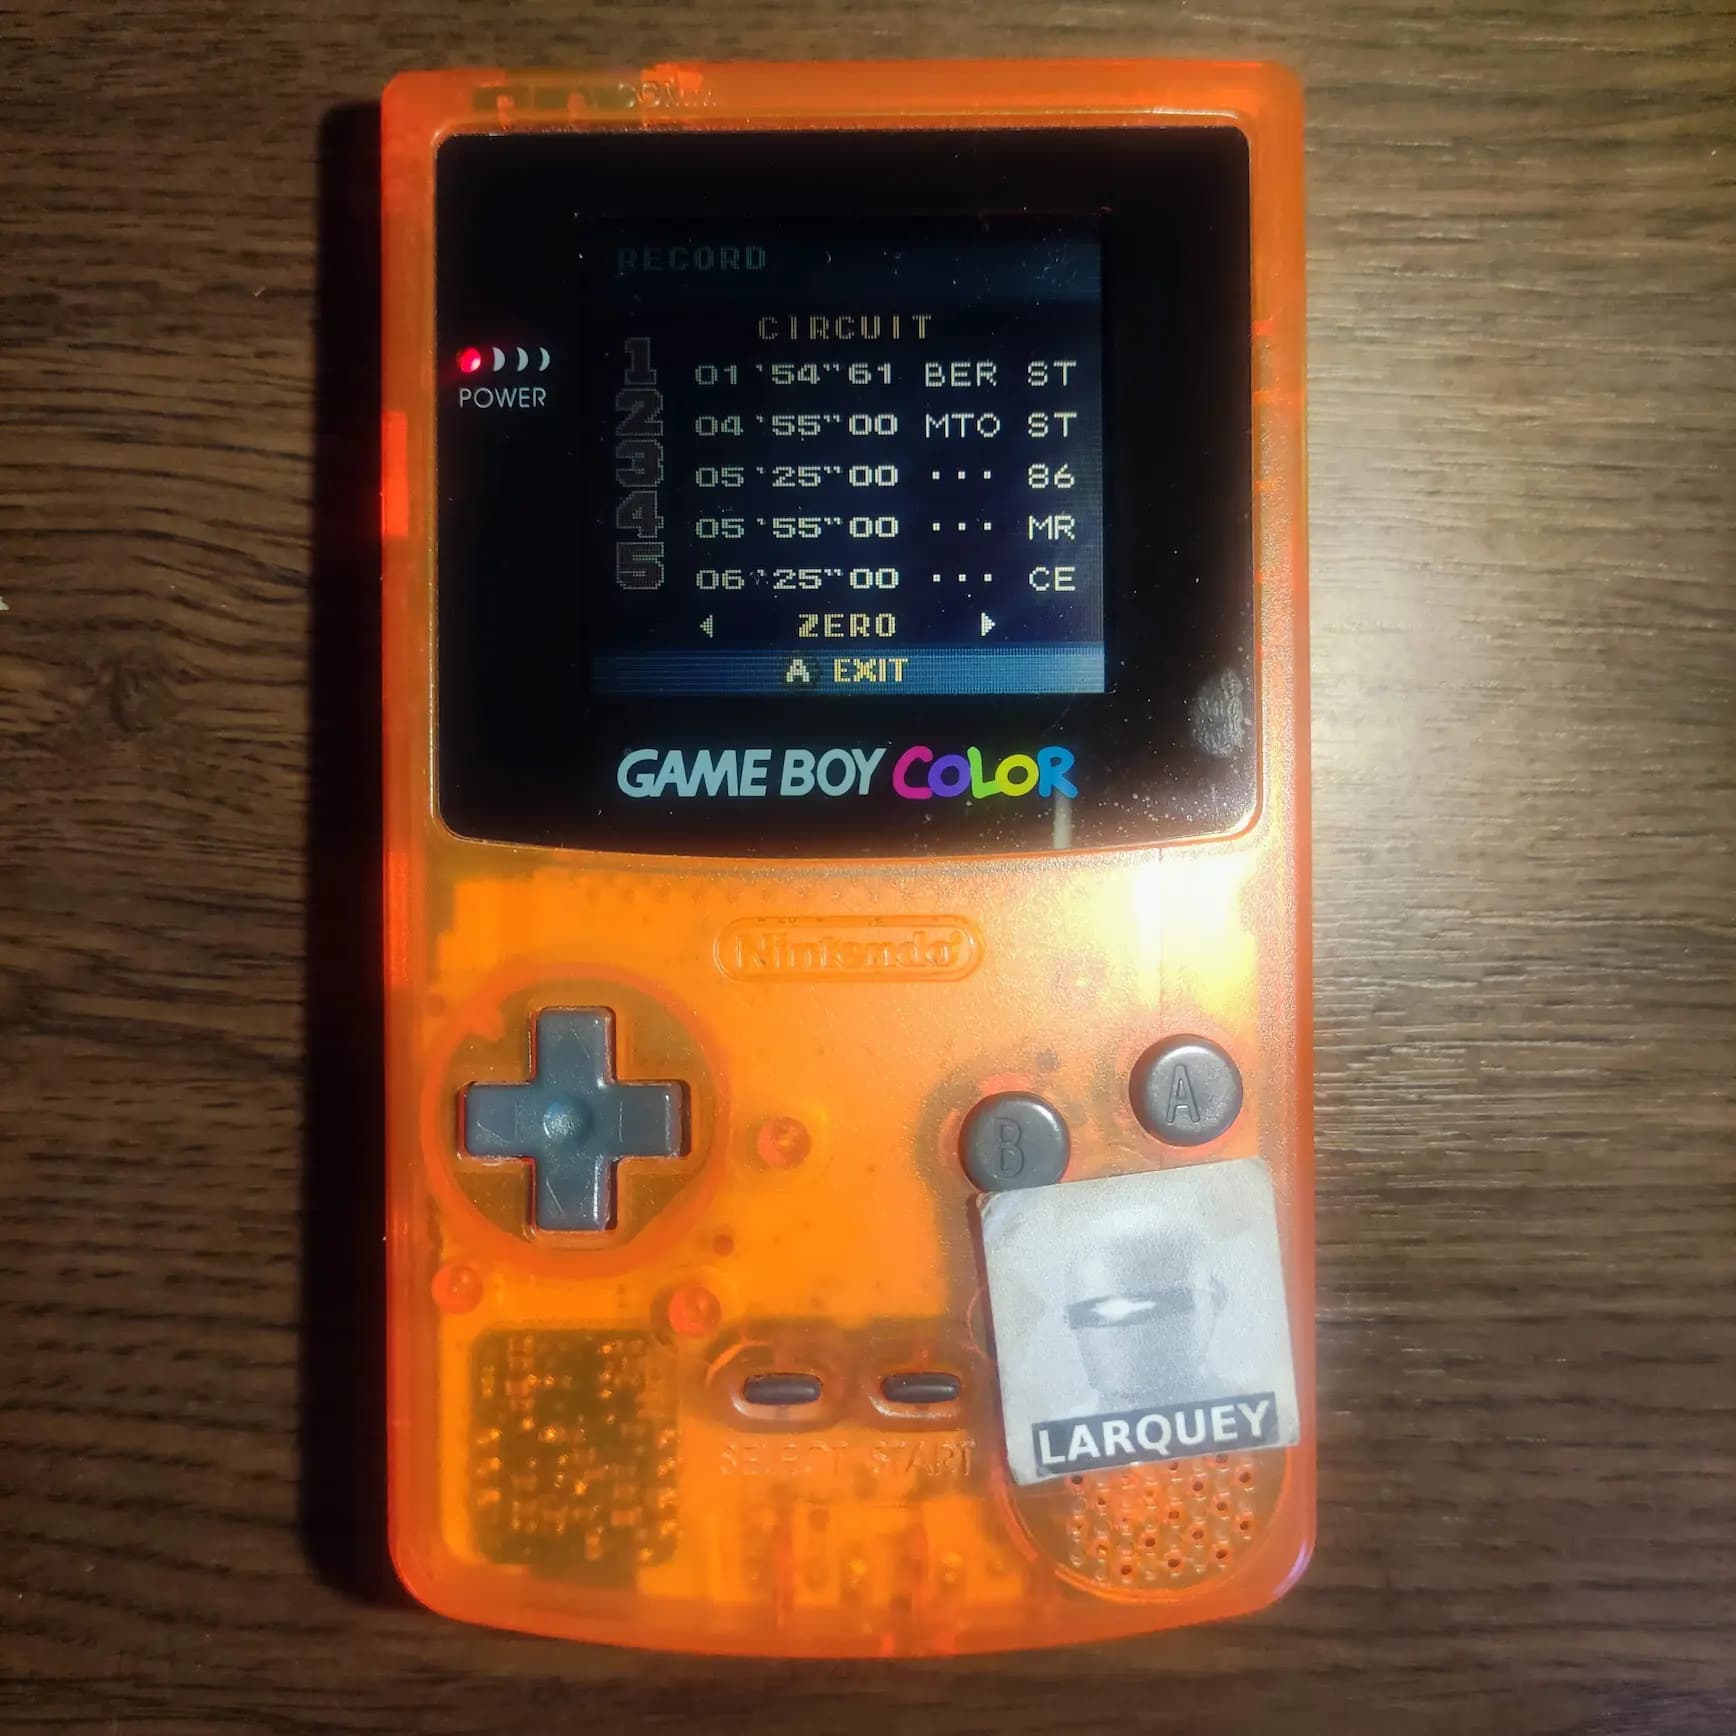 Larquey: Pocket GT: Time Attack [Circuit Zero] (Game Boy Color) 0:01:54.61 points on 2022-08-04 03:40:16